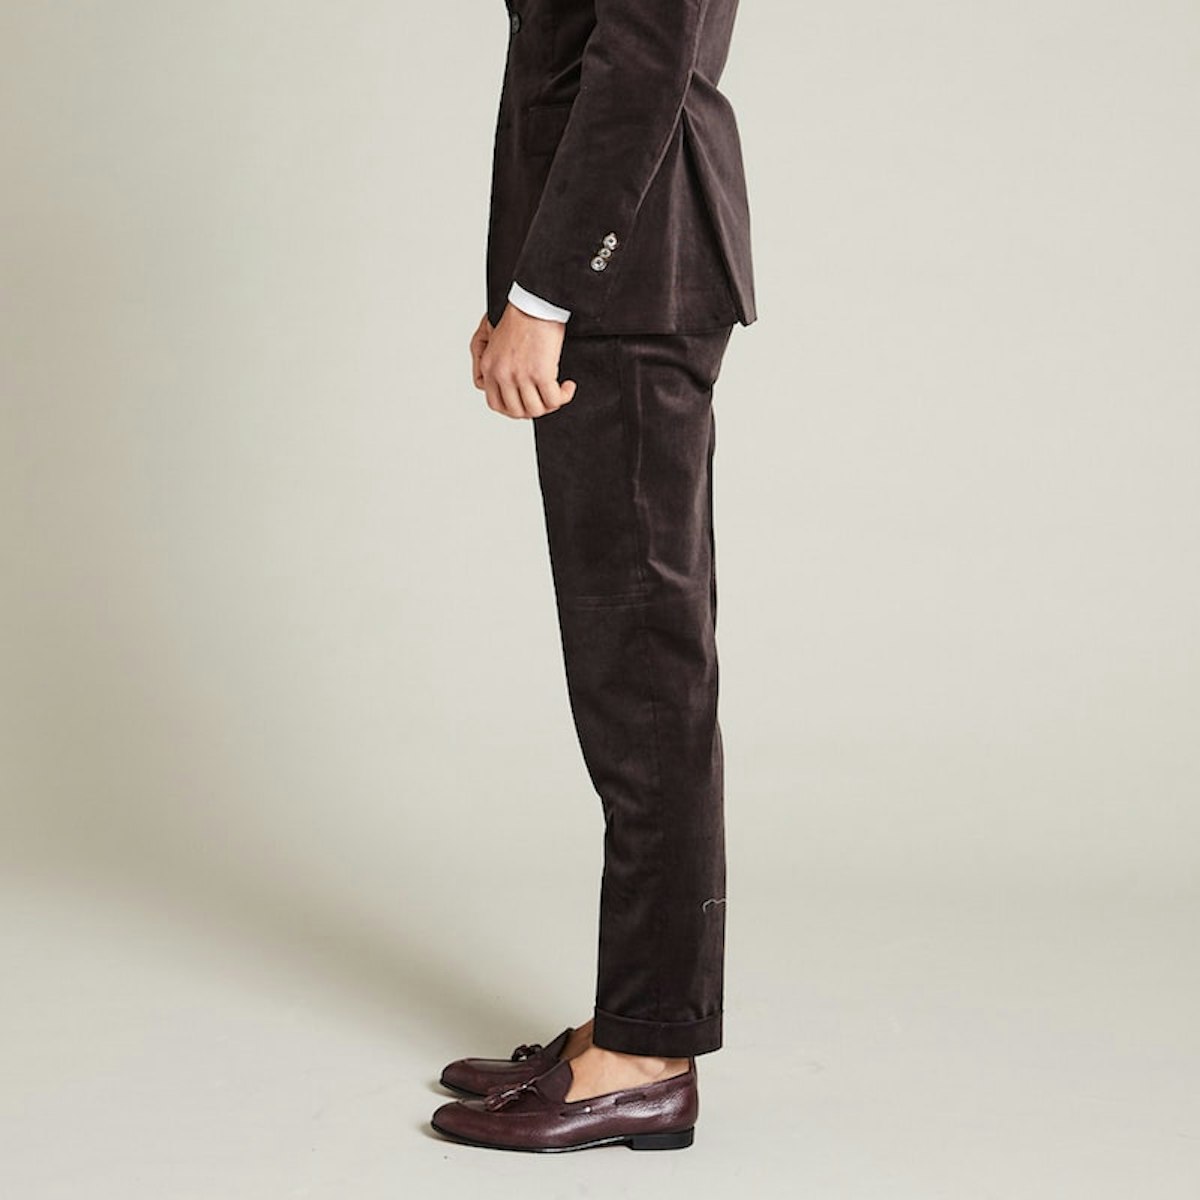 InStitchu Collection The Bates Brown Corduroy Pants